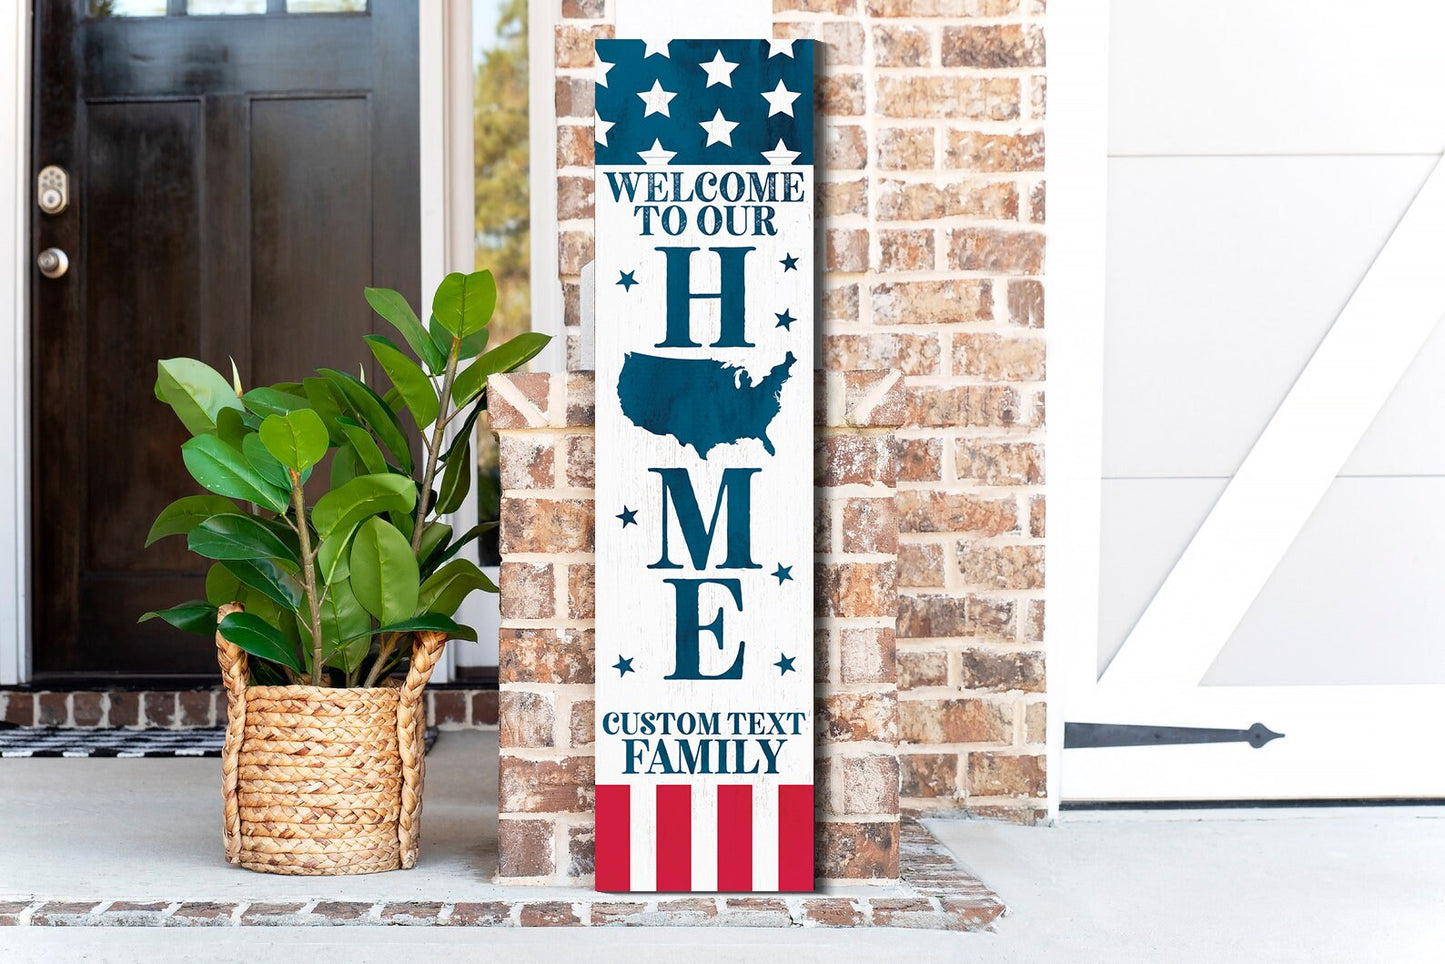 36in Wooden 4th of July "Welcome to Our Home" Custom Text Porch Sign - Personalized Patriotic Front Door Decor for Independence Day